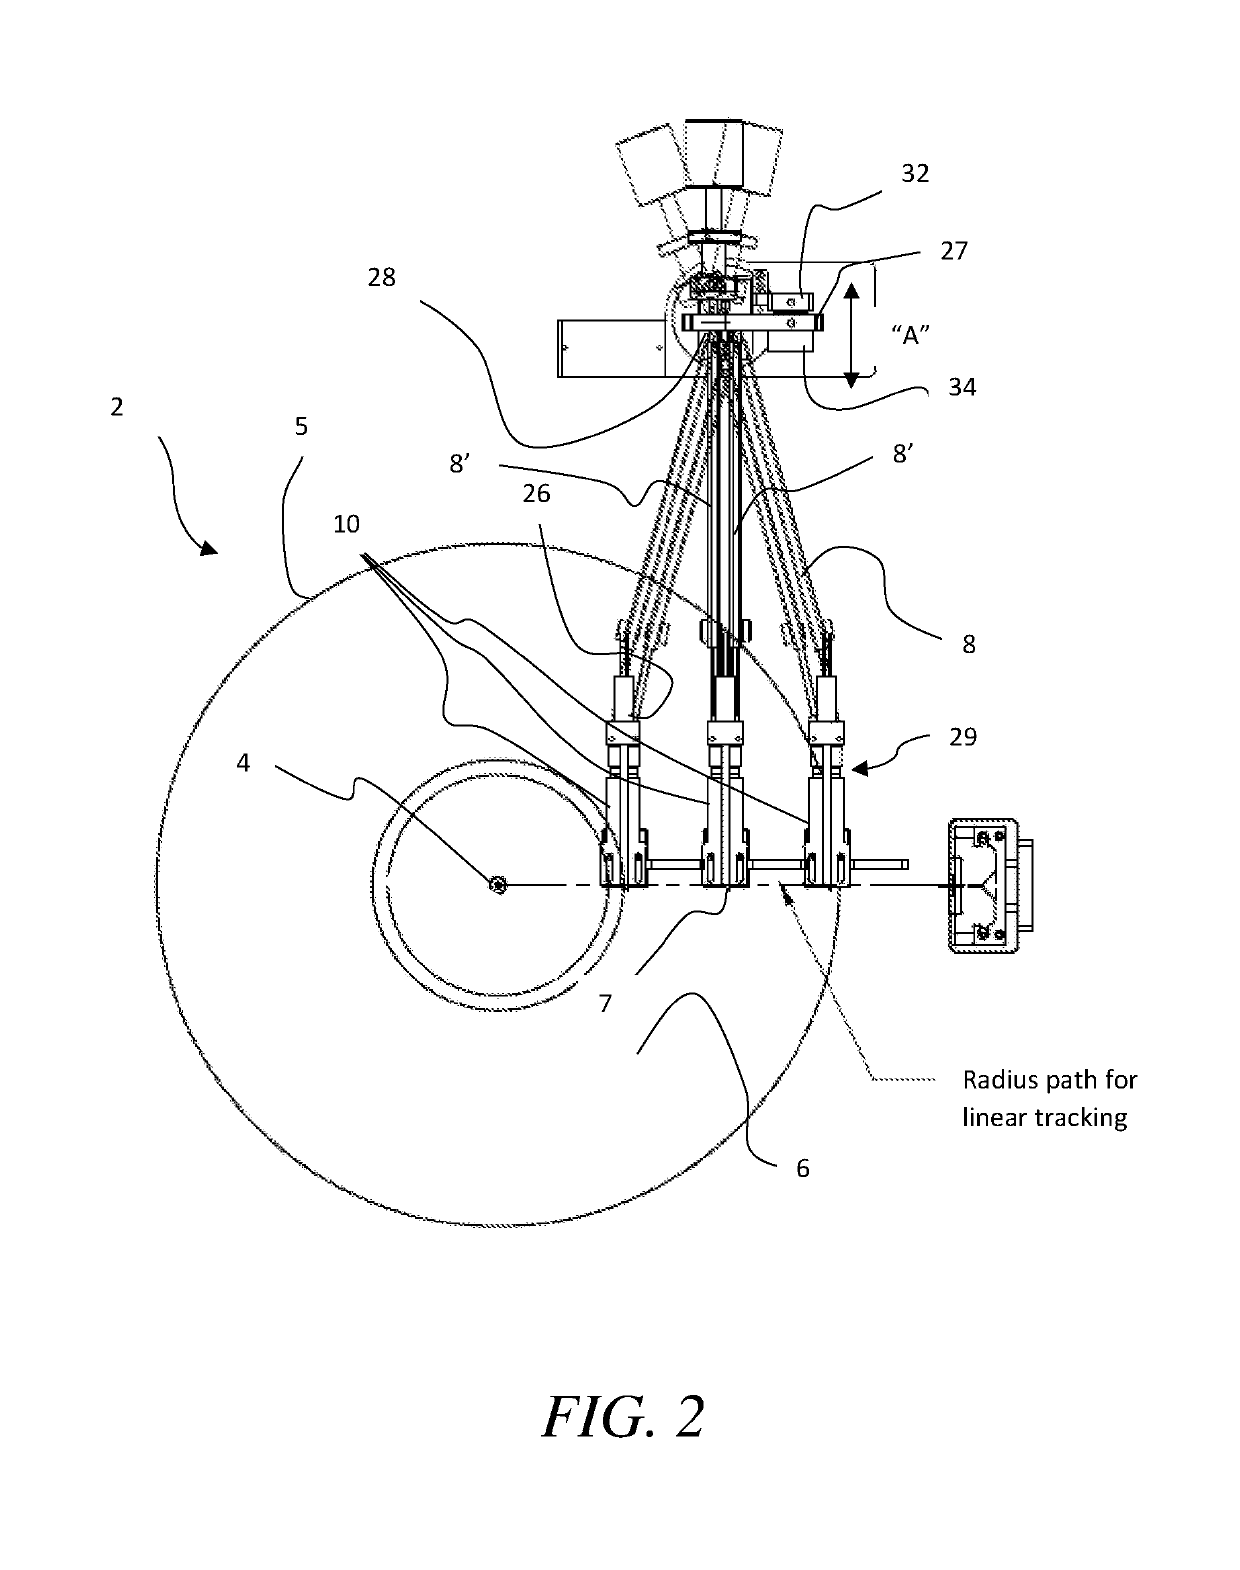 Apparatus, methods, and systems for achieving linear tonearm tracking for a record turntable